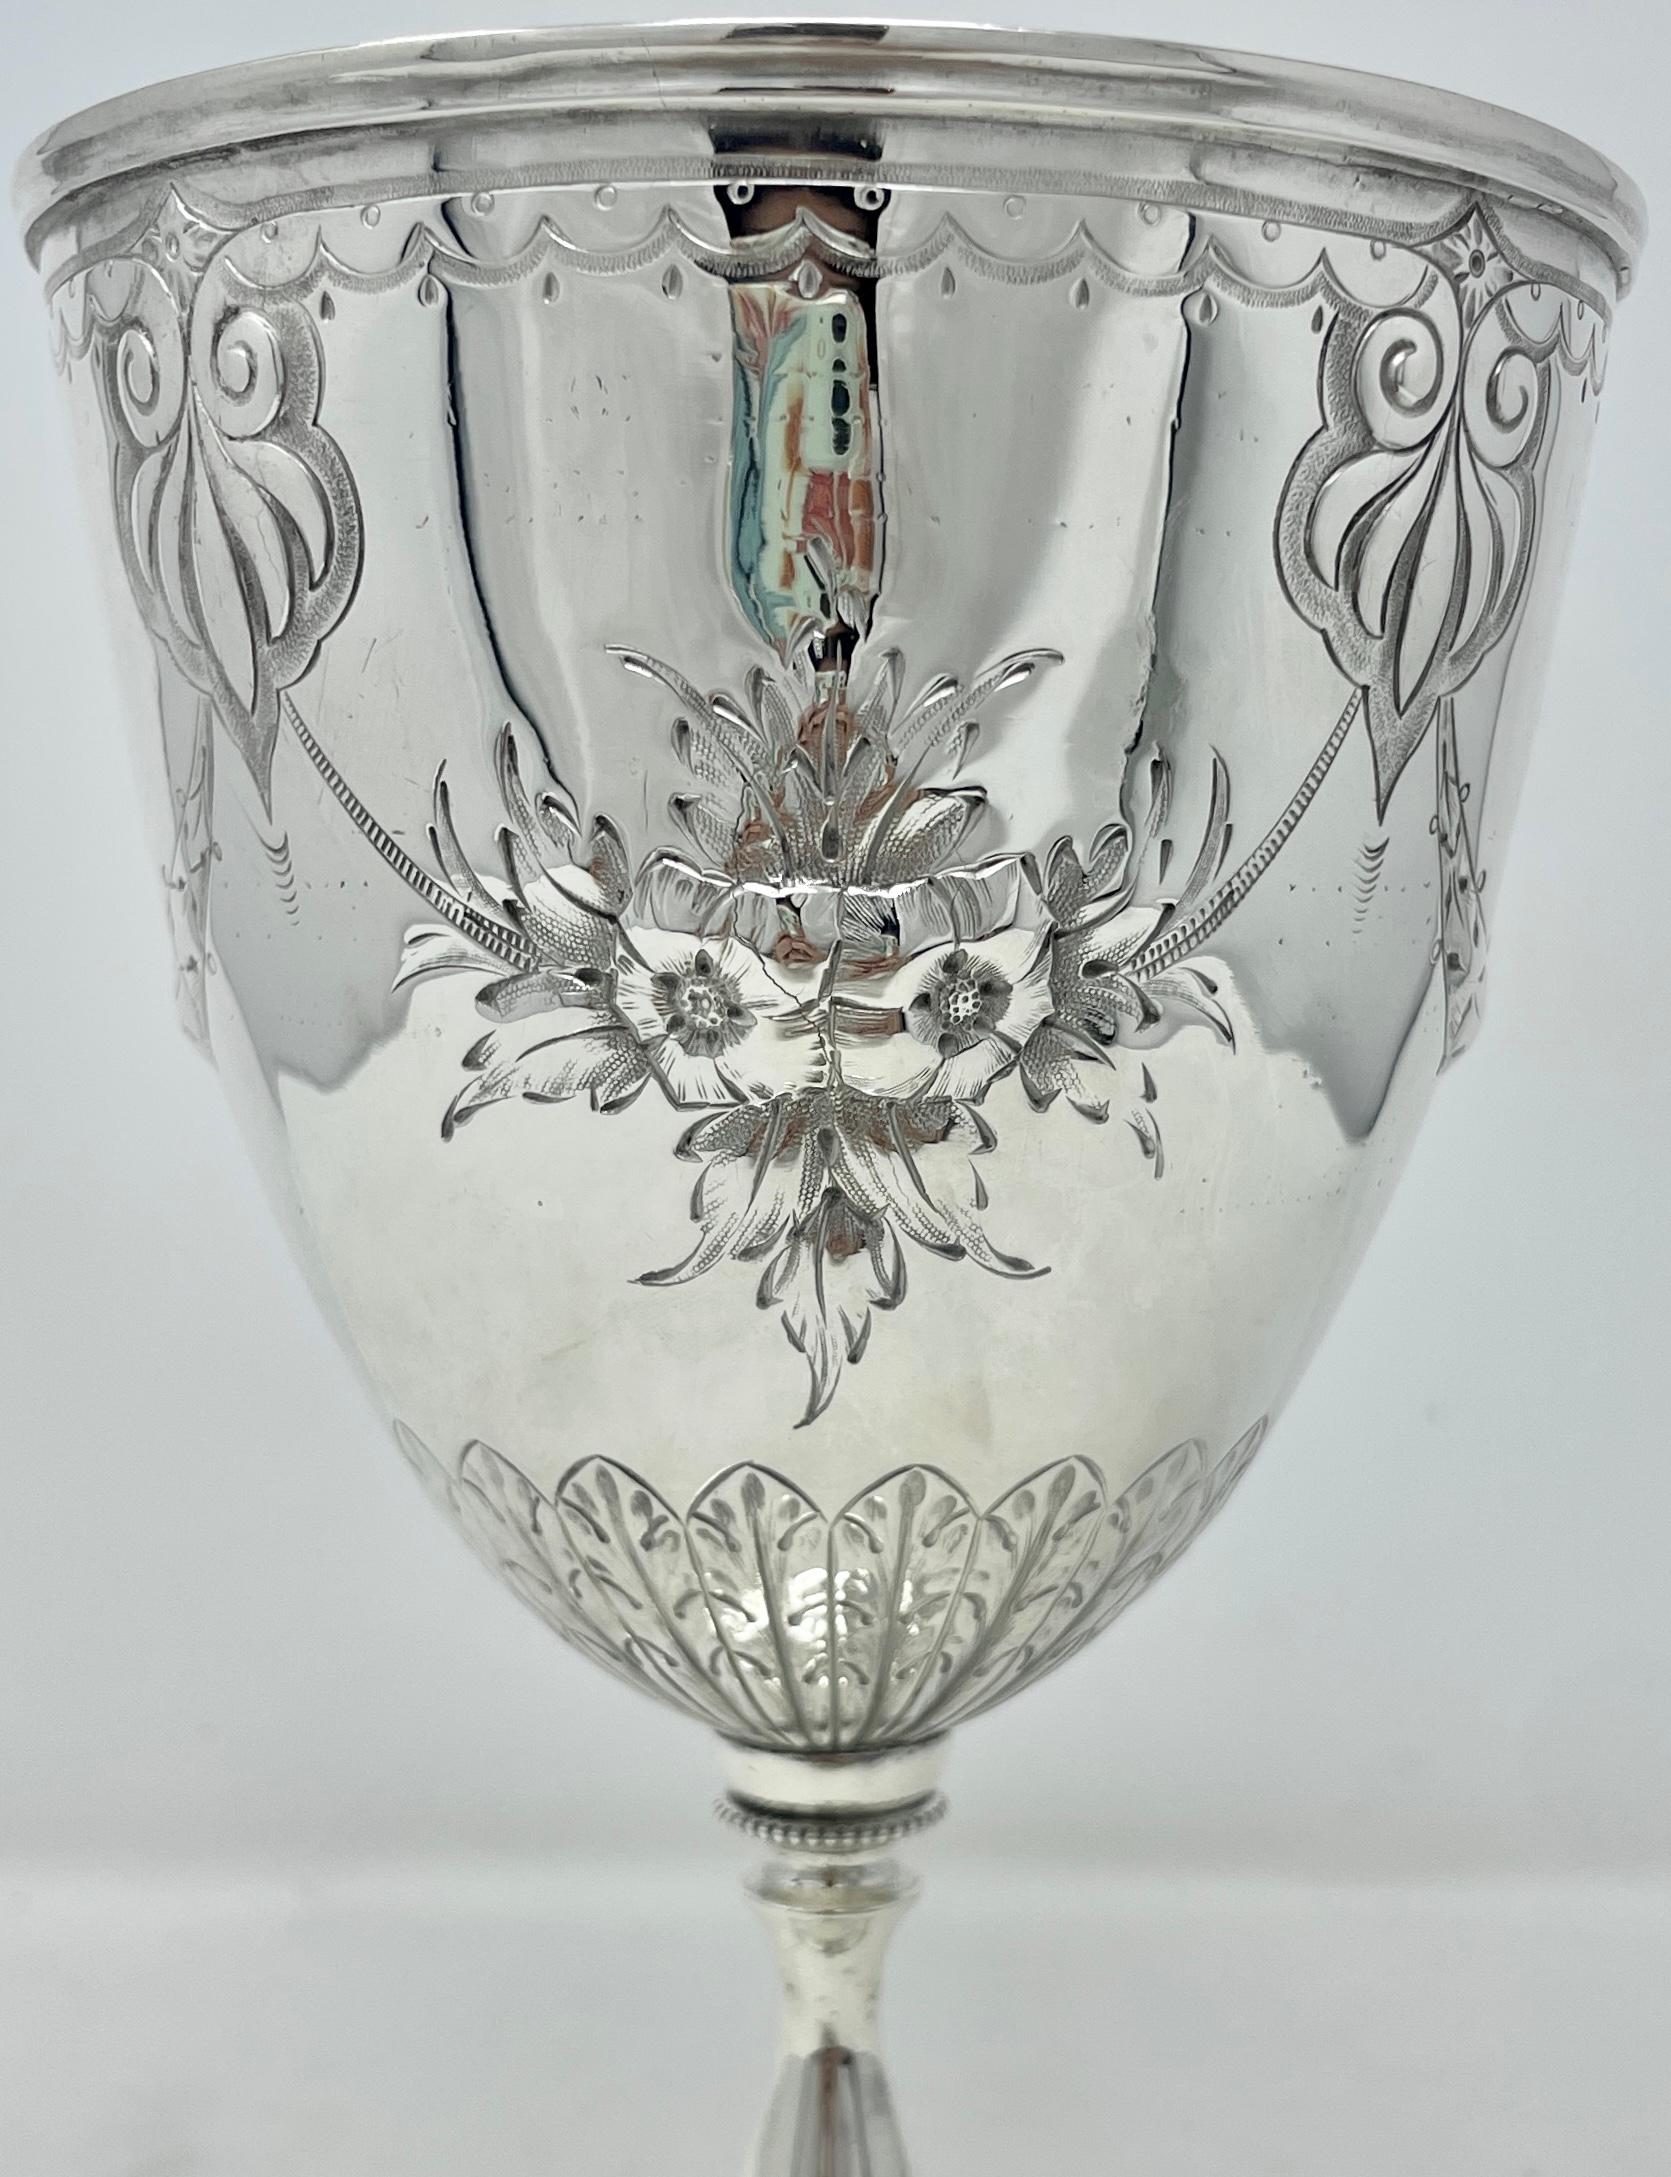 Silver Plate Antique English Victorian Chased Silver-Plated Goblet, Circa 1900.